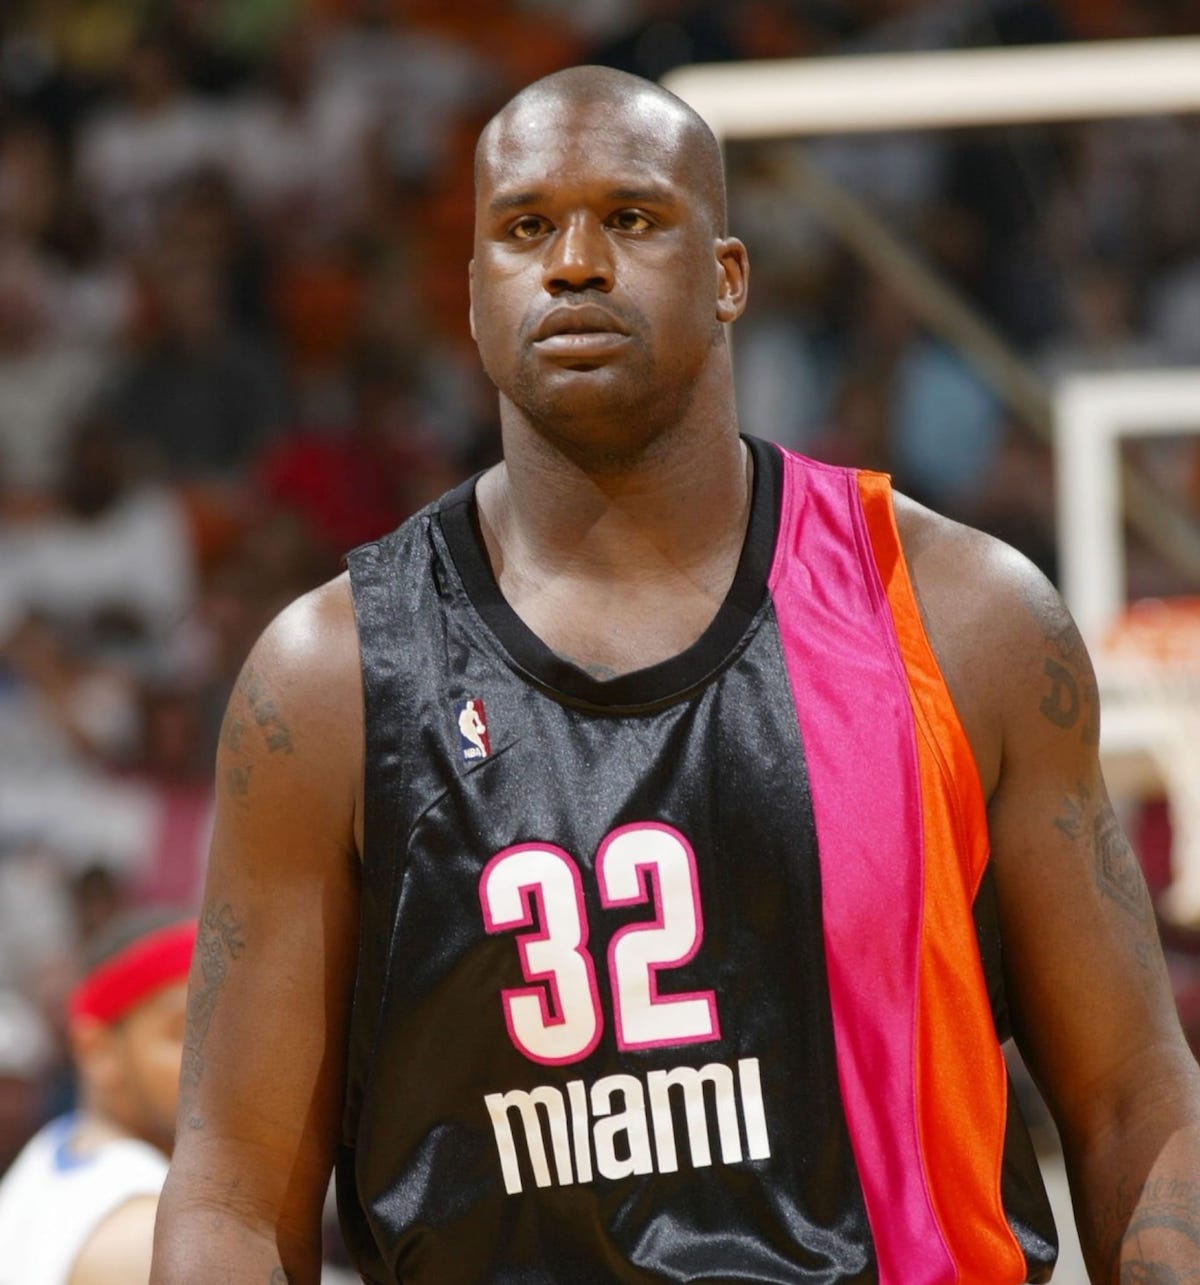 Shaquille-Oneal-Miami-Heat-Floridians-Jersey.jpeg